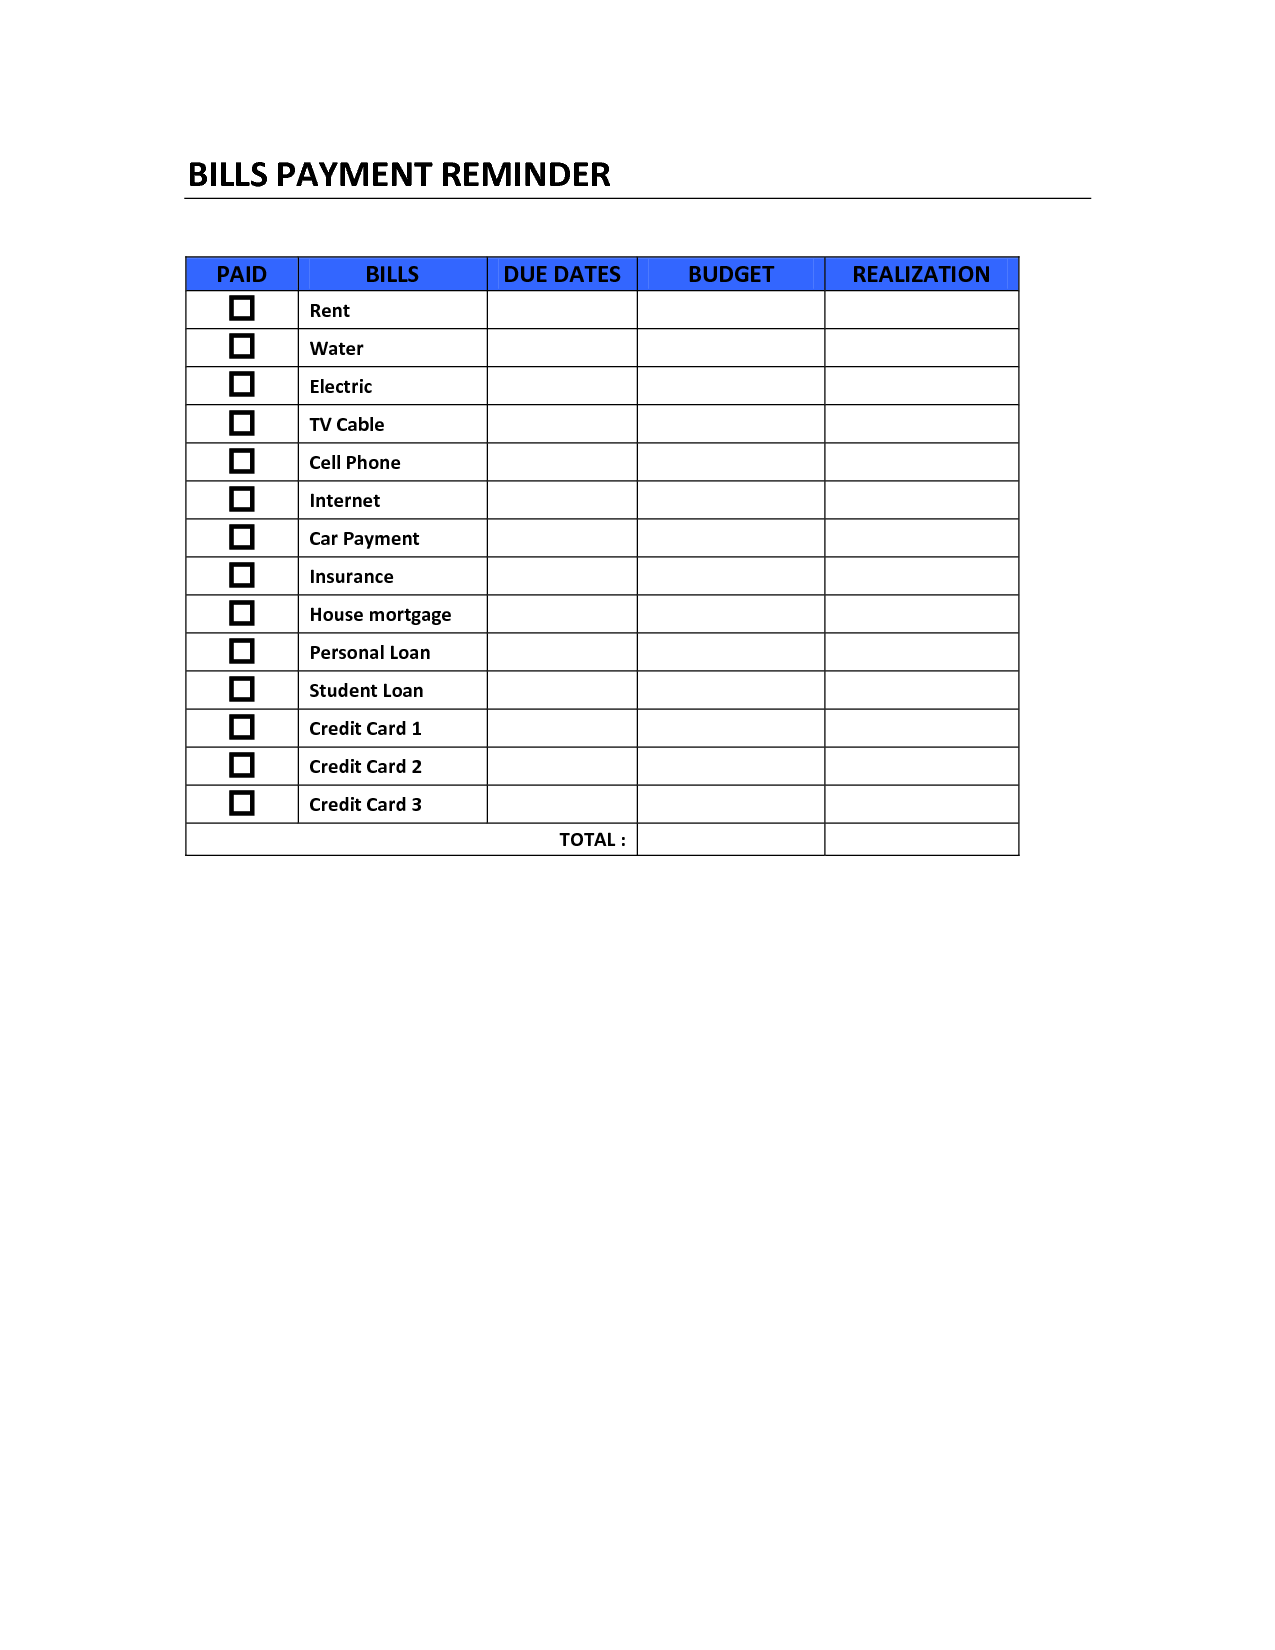 10 Best Images of Bill Paying Worksheet Microsoft Word - Monthly Bill